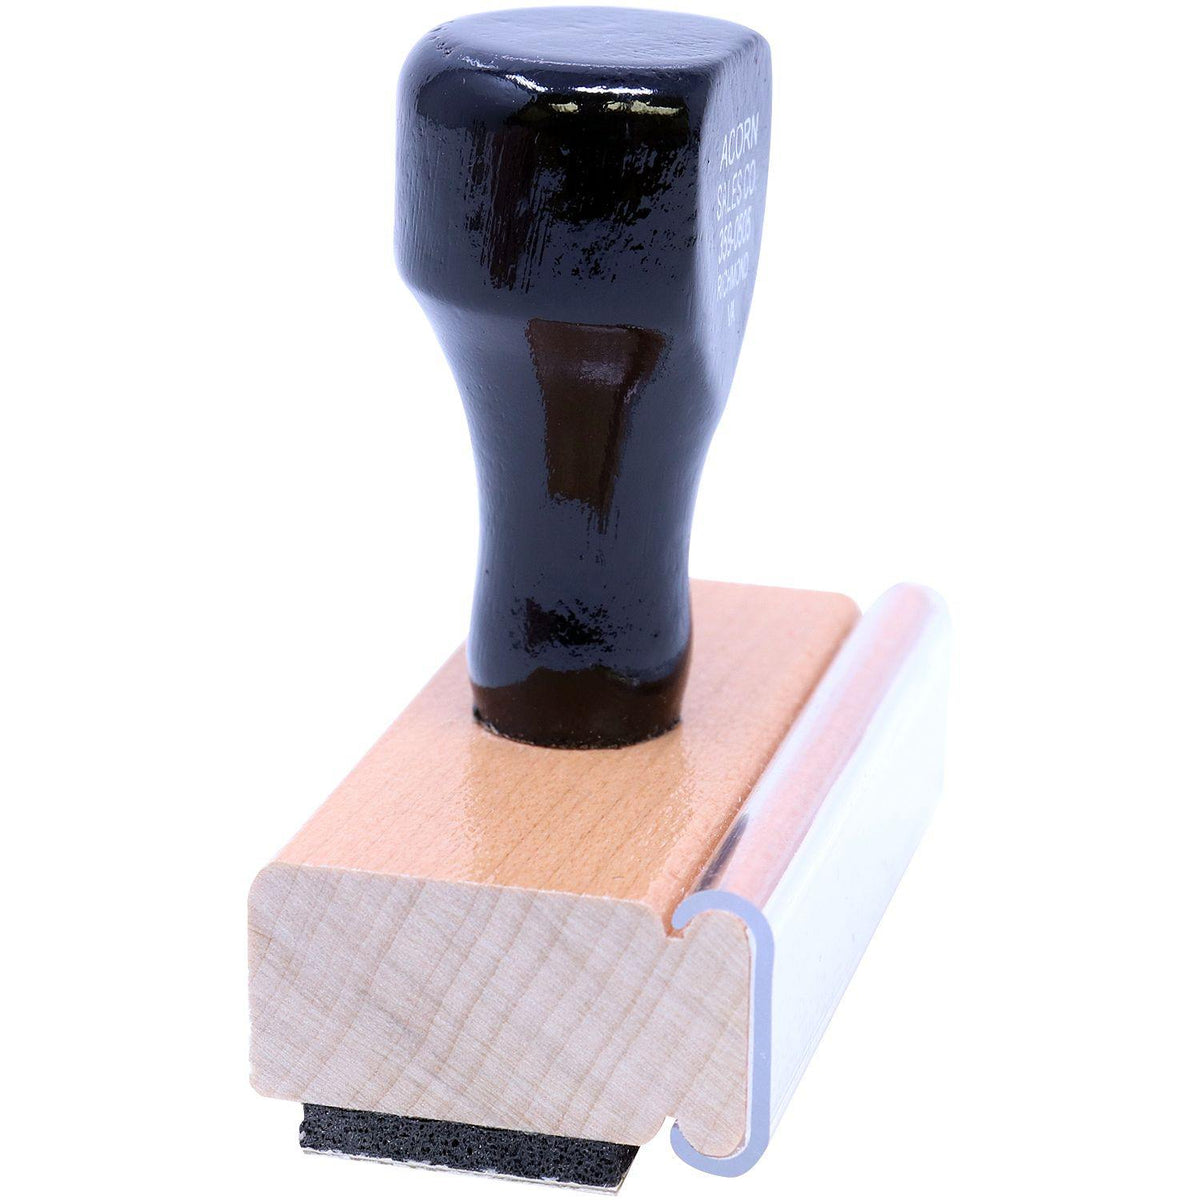 Side View of Top Secret Rubber Stamp at an Angle